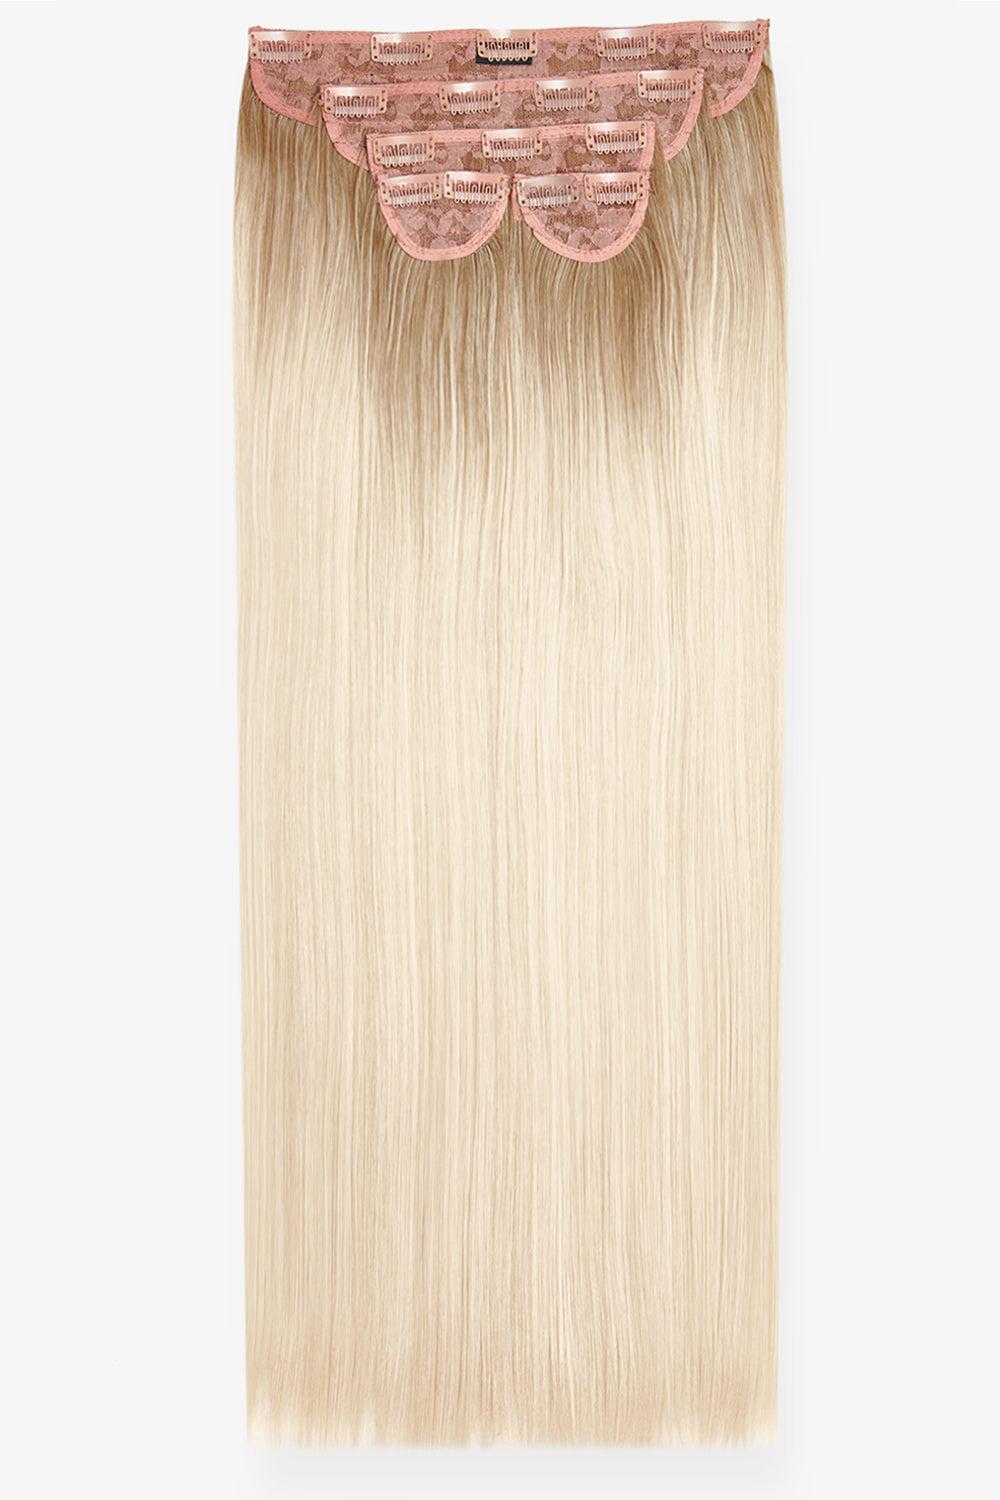 Super Thick 26" 5 Piece Statement Straight Clip In Hair Extensions - LullaBellz - Rooted Light Blonde